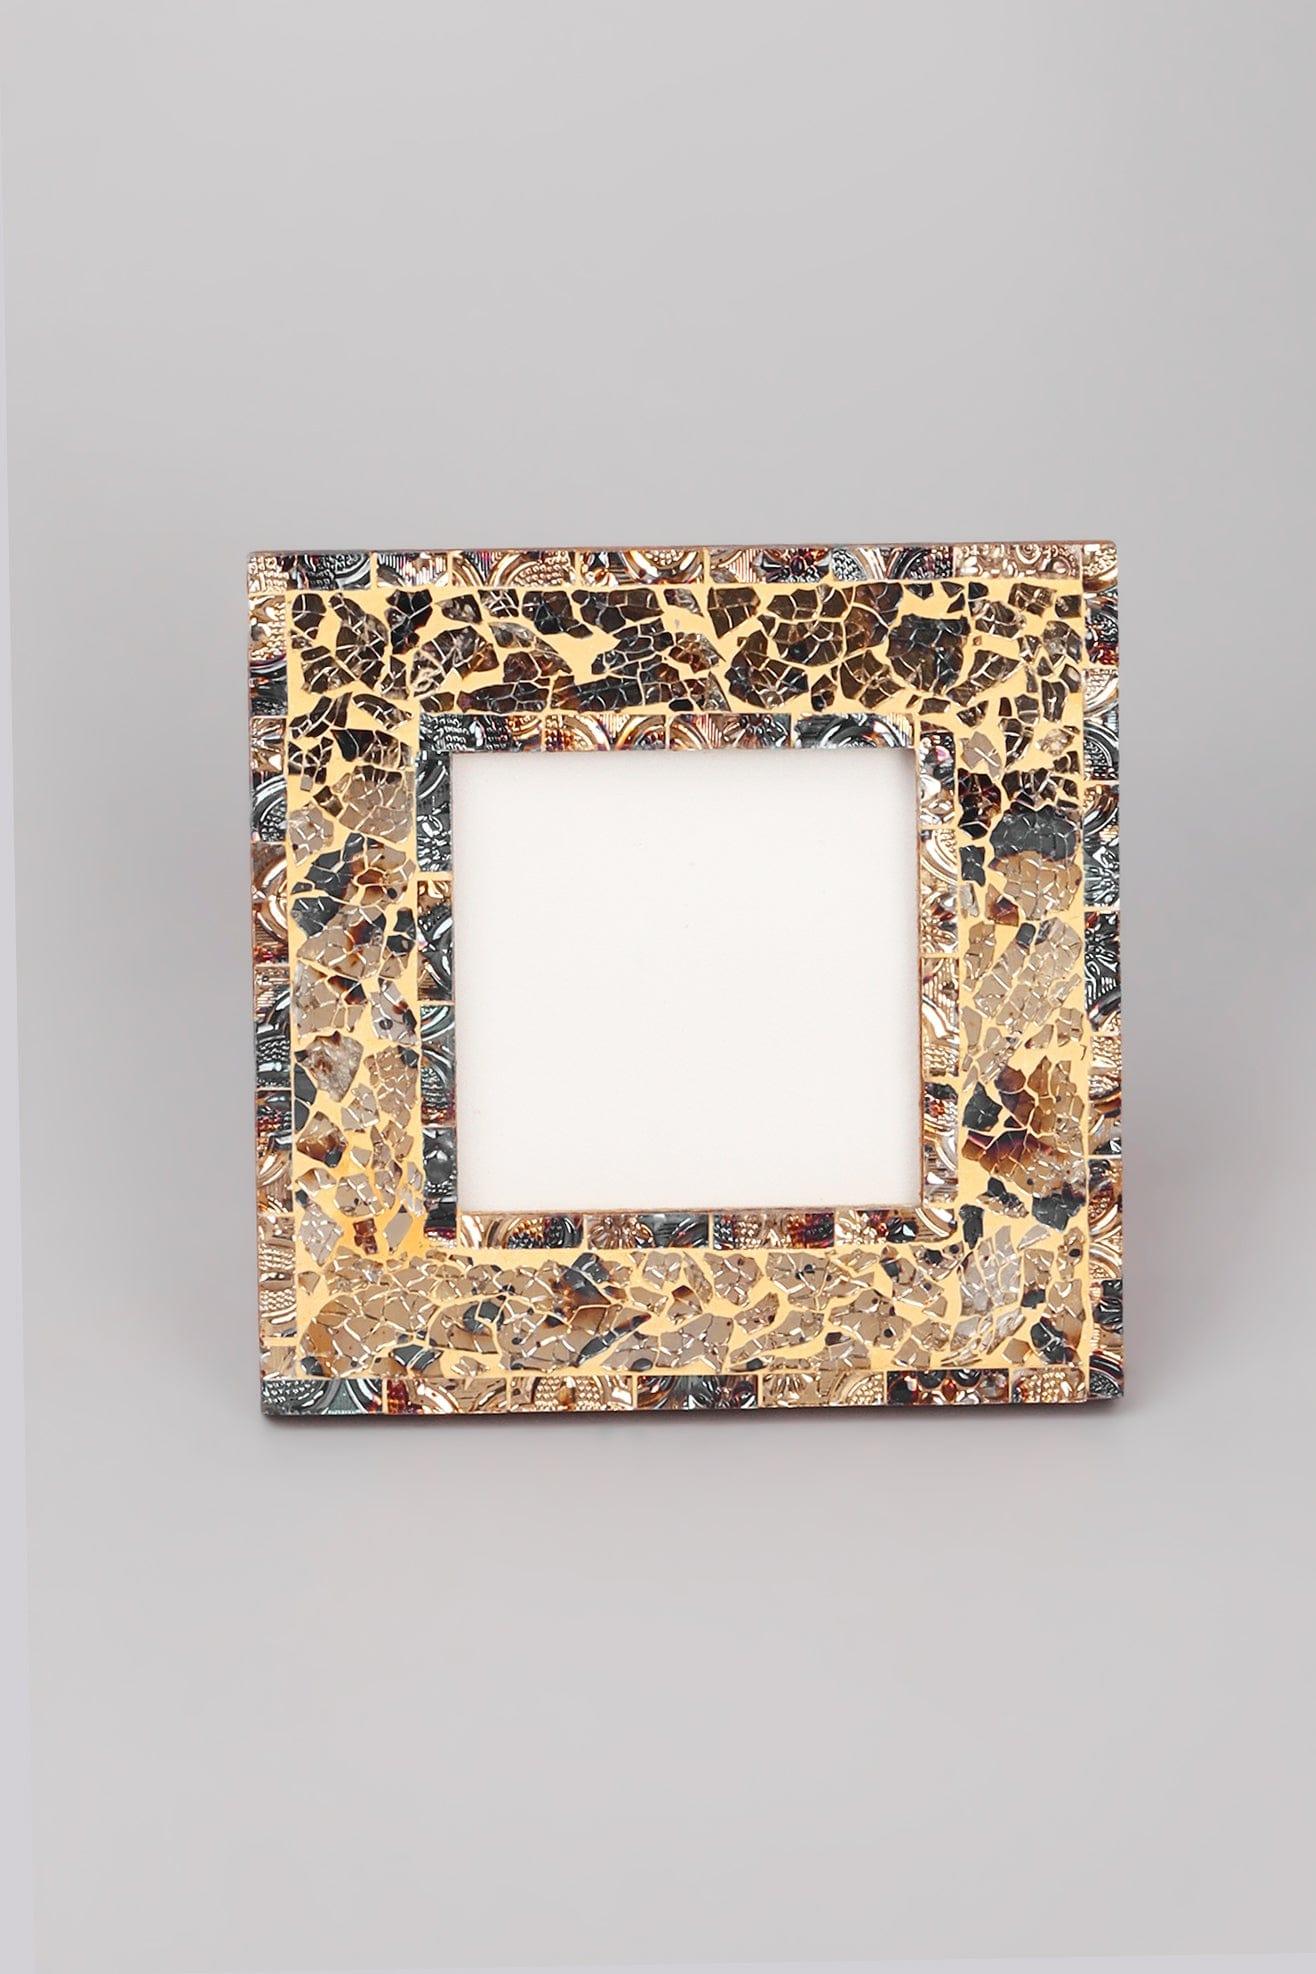 G Decor Picture frames Brown / Small Brown Pebble Rock Effect Stylish Photo Frames